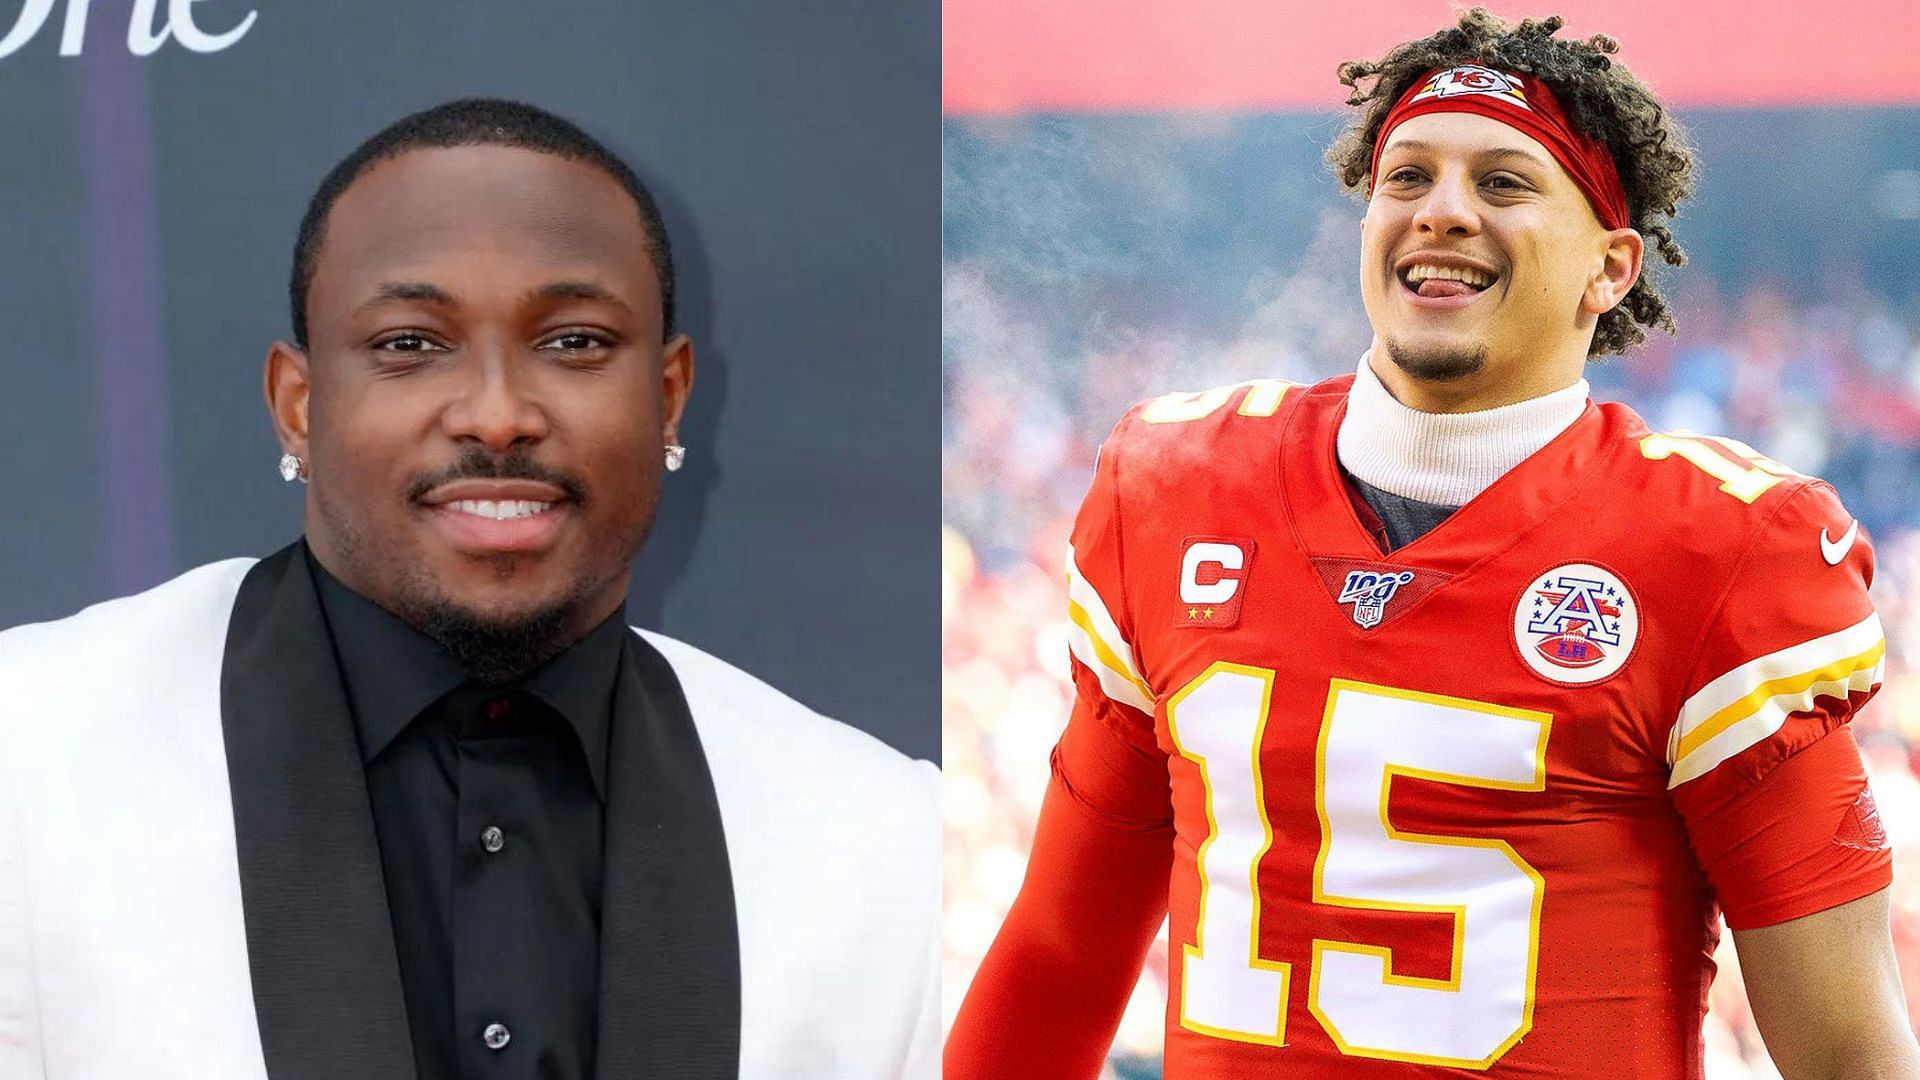 Fox Sports analyst LeSean McCoy (L) caught up in fake tweet about Patrick Mahomes (L) and his Chiefs teammate